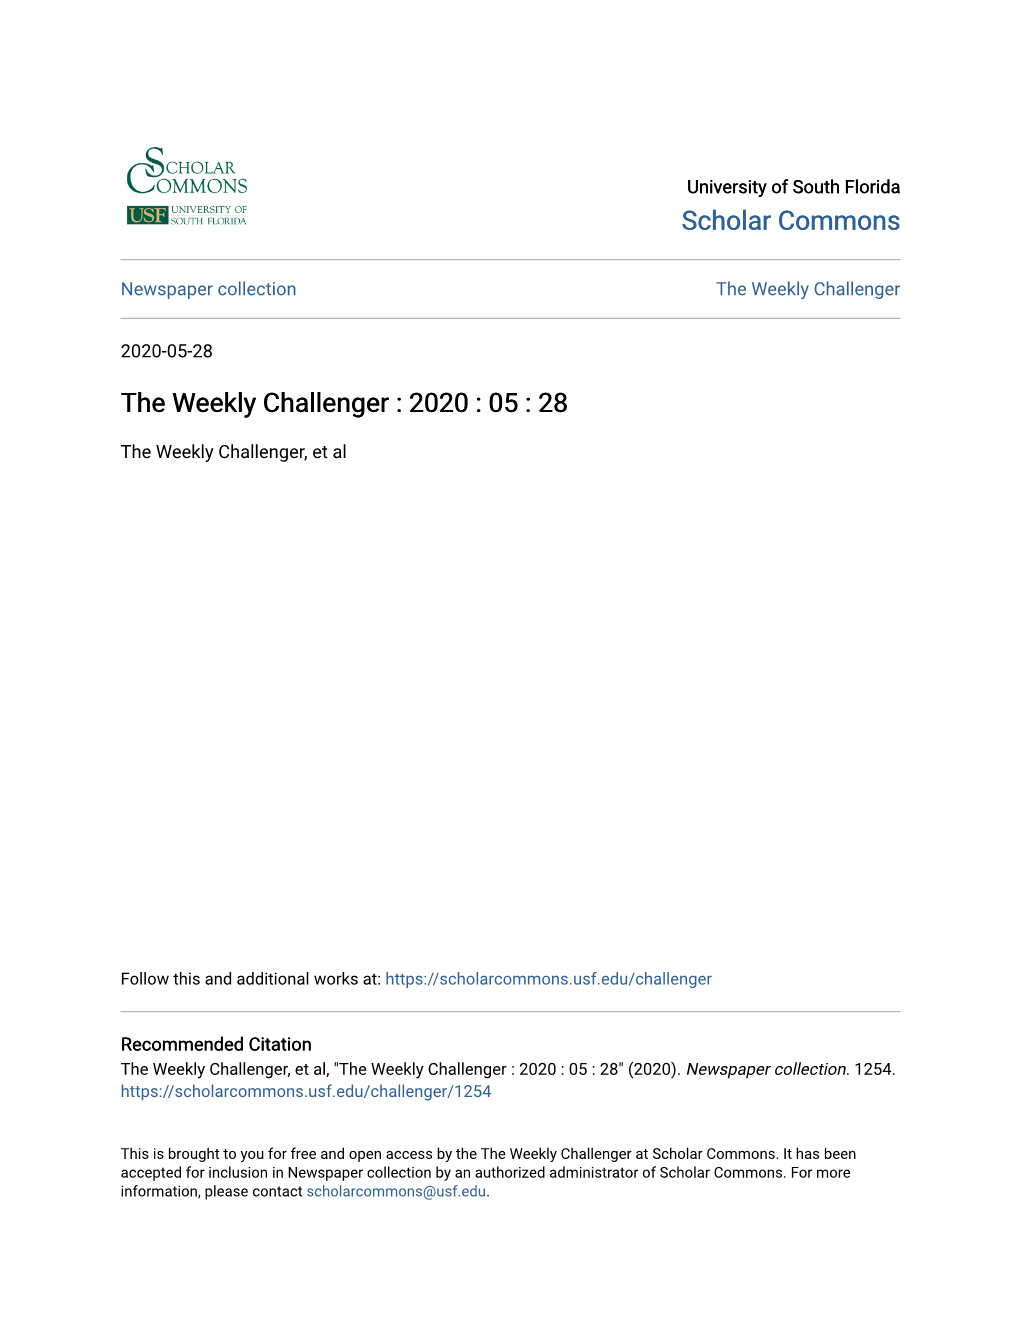 The Weekly Challenger : 2020 : 05 : 28